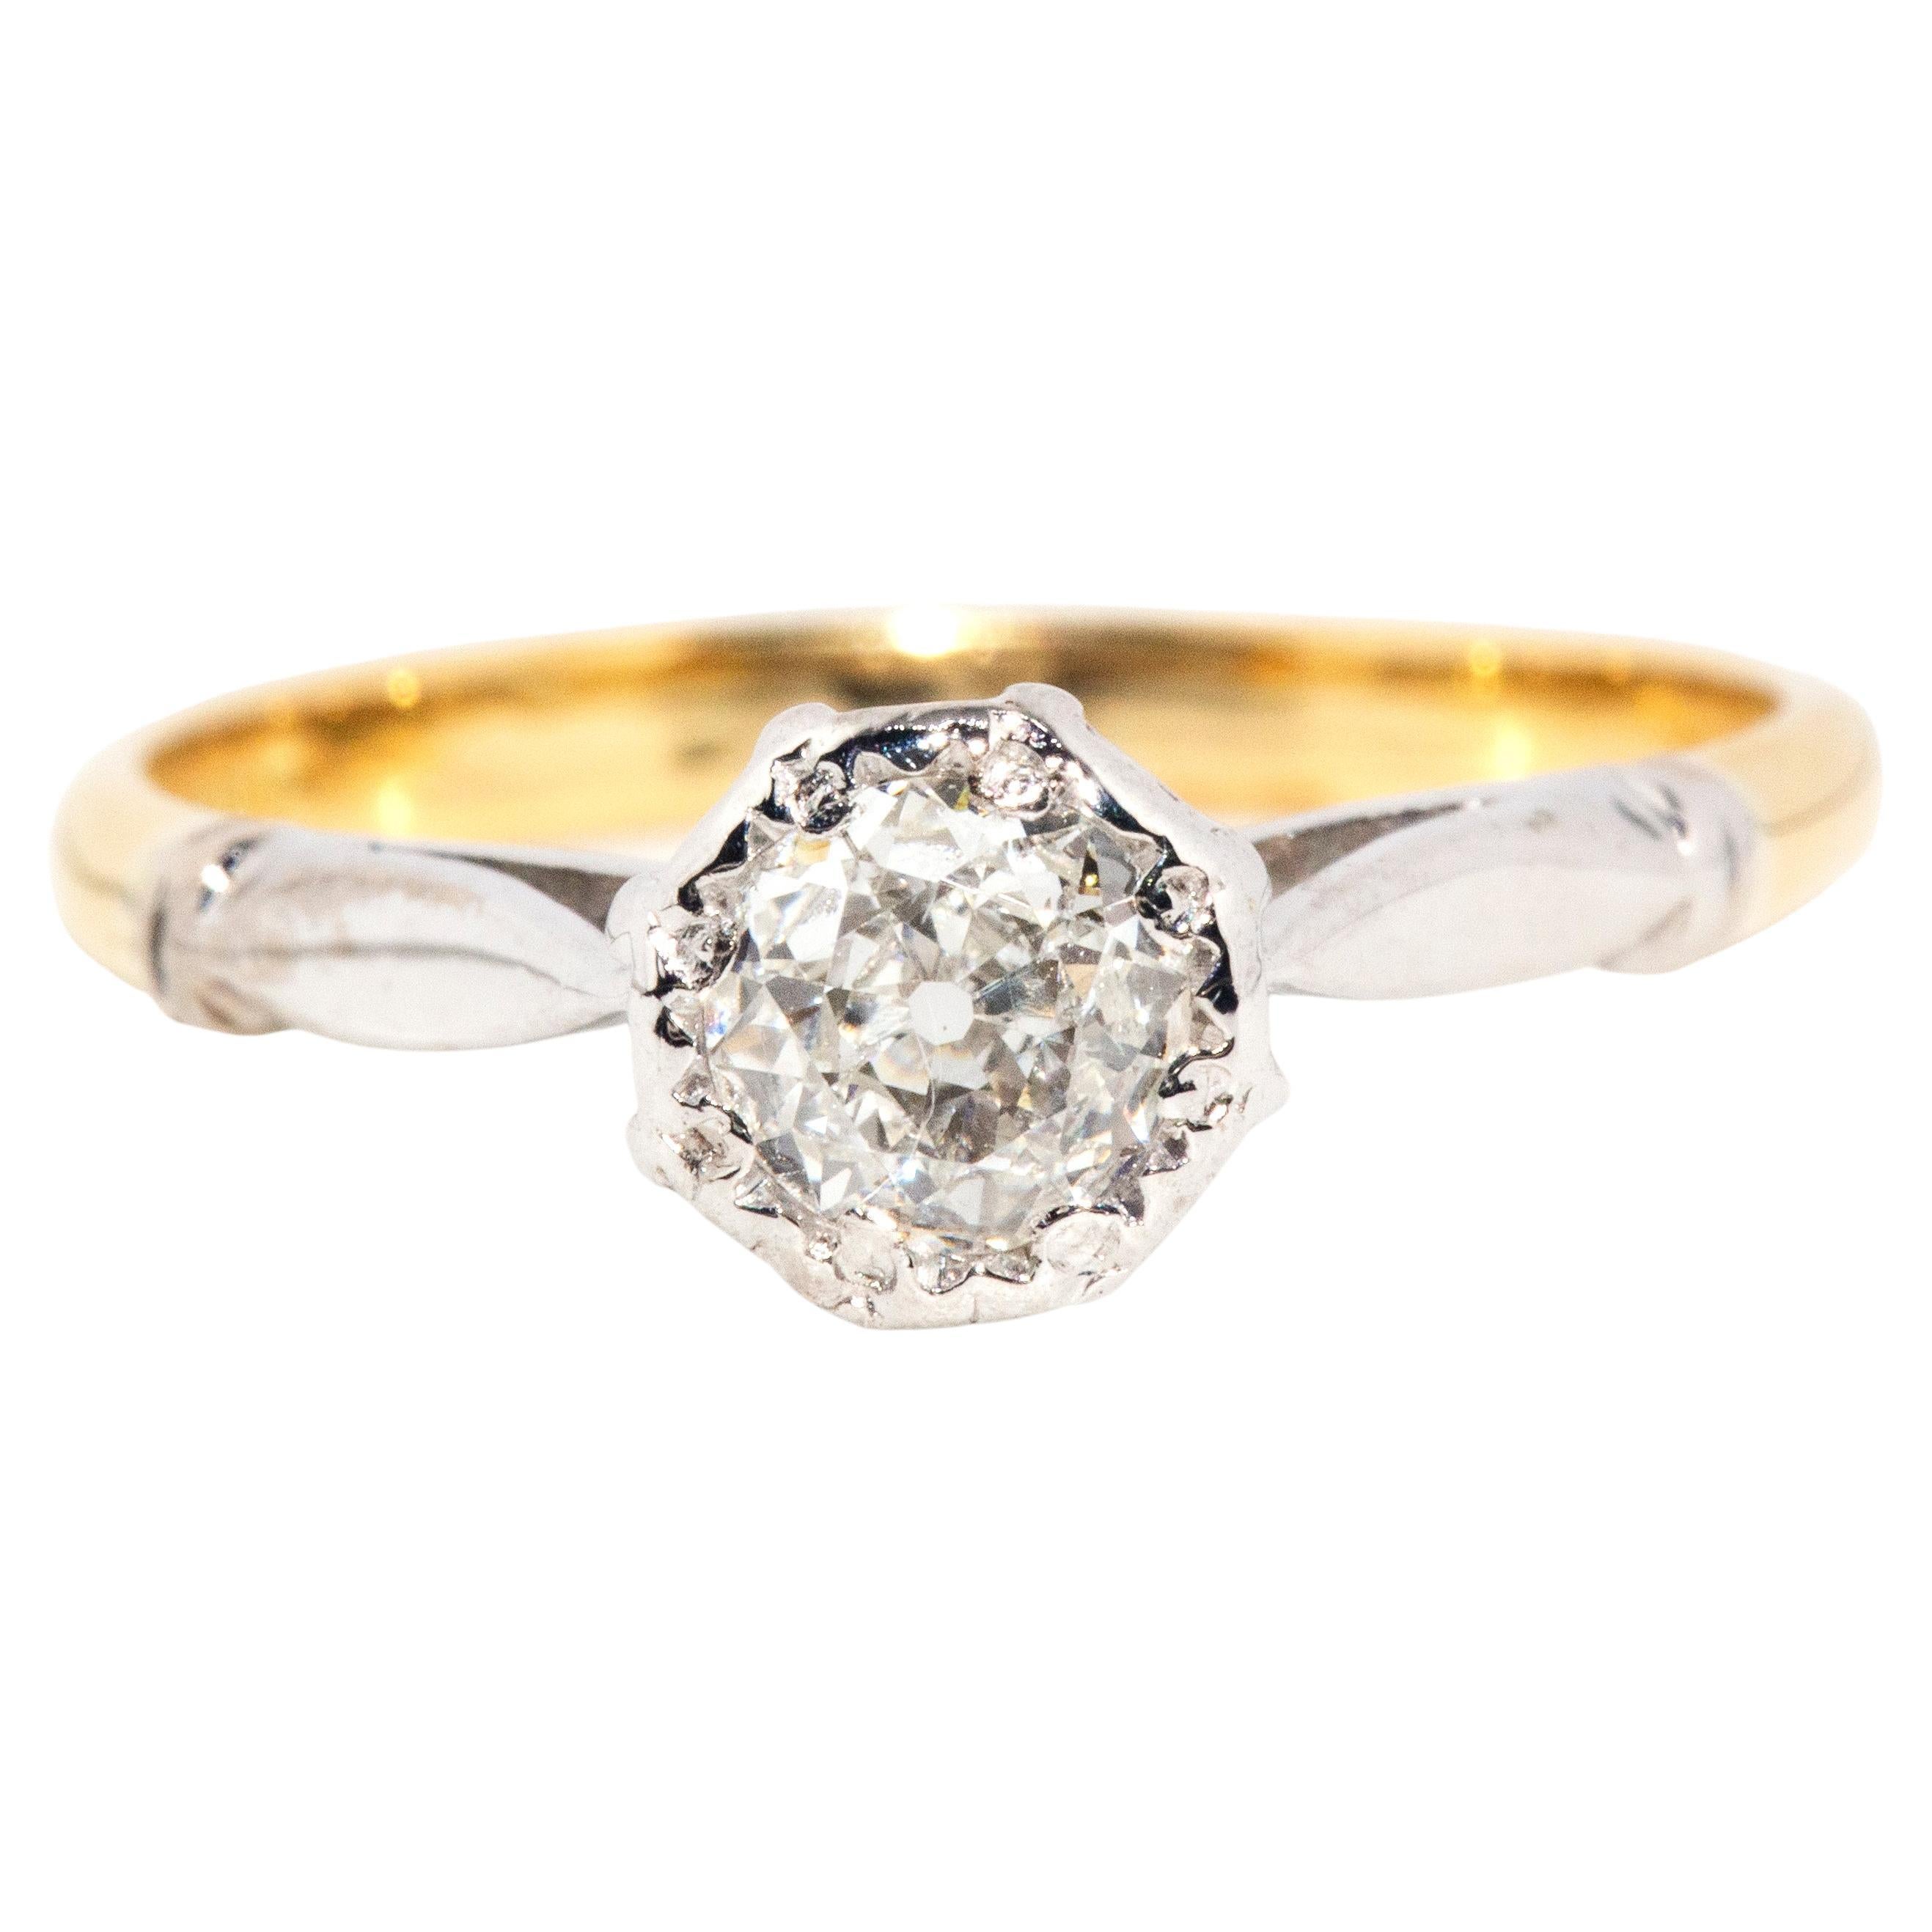 Vintage Circa 1940s 18 Carat Yellow & White Gold Old Cut Solitaire Diamond Ring